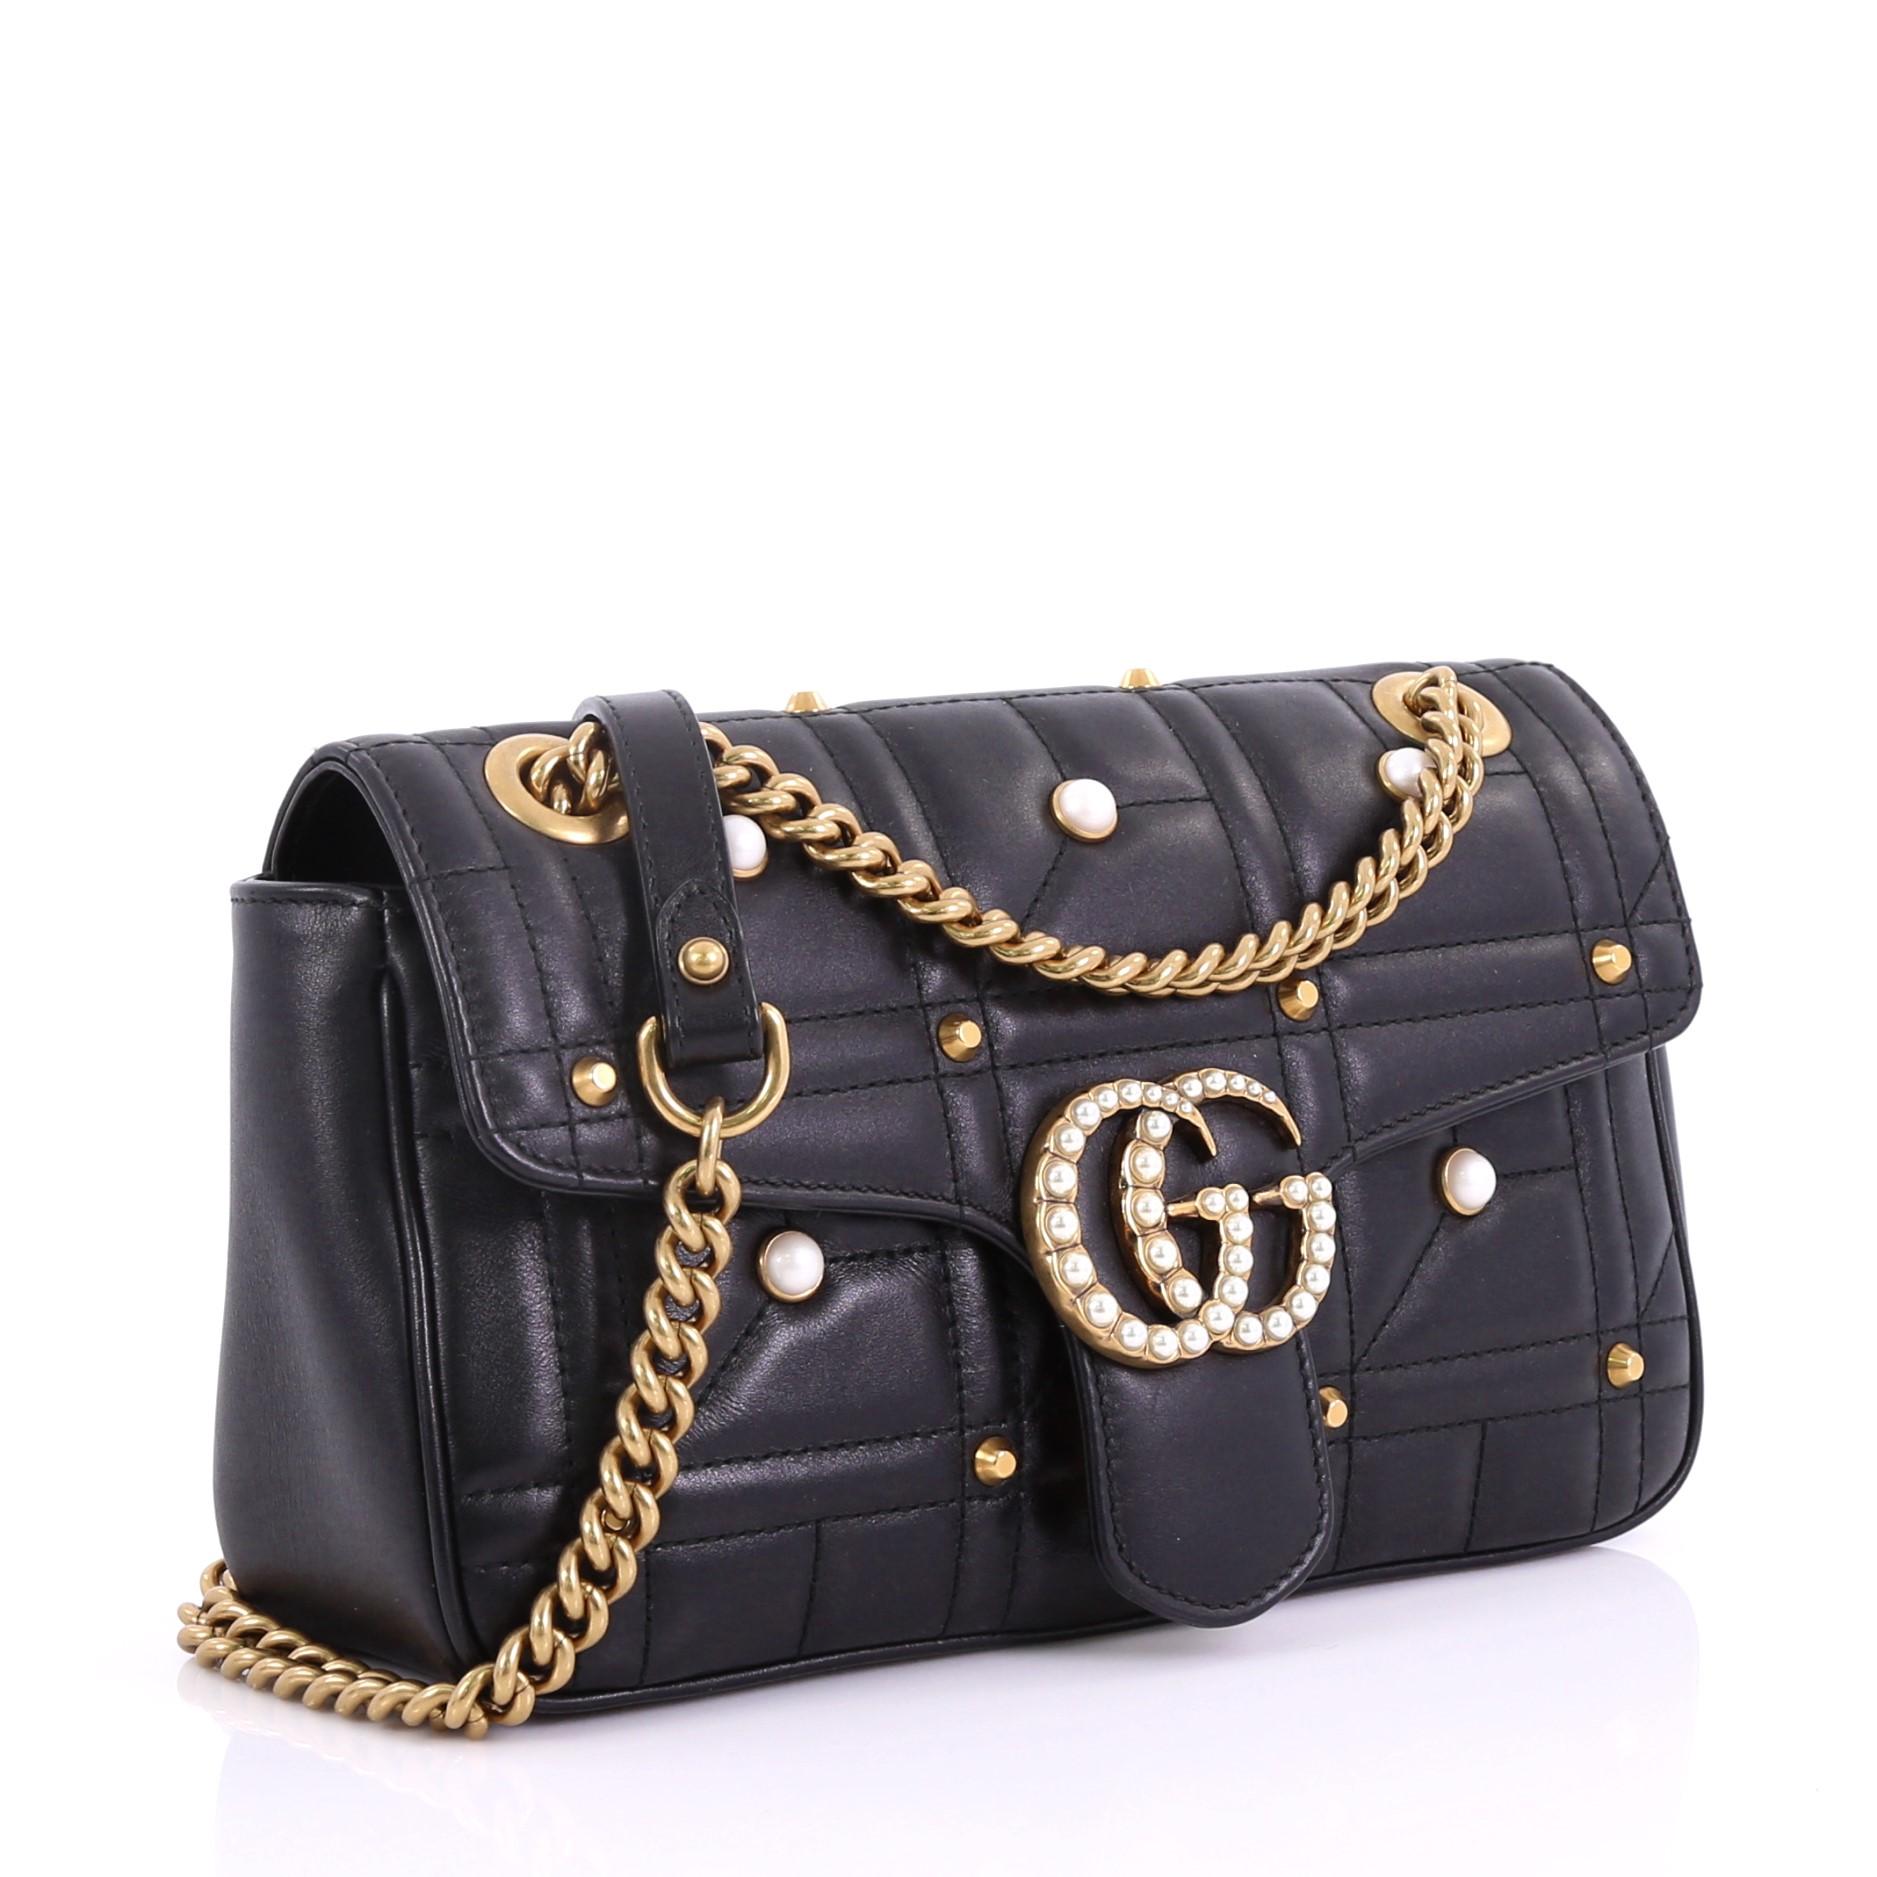 Black Gucci Pearly GG Marmont Flap Bag Embellished Matelasse Leather Small